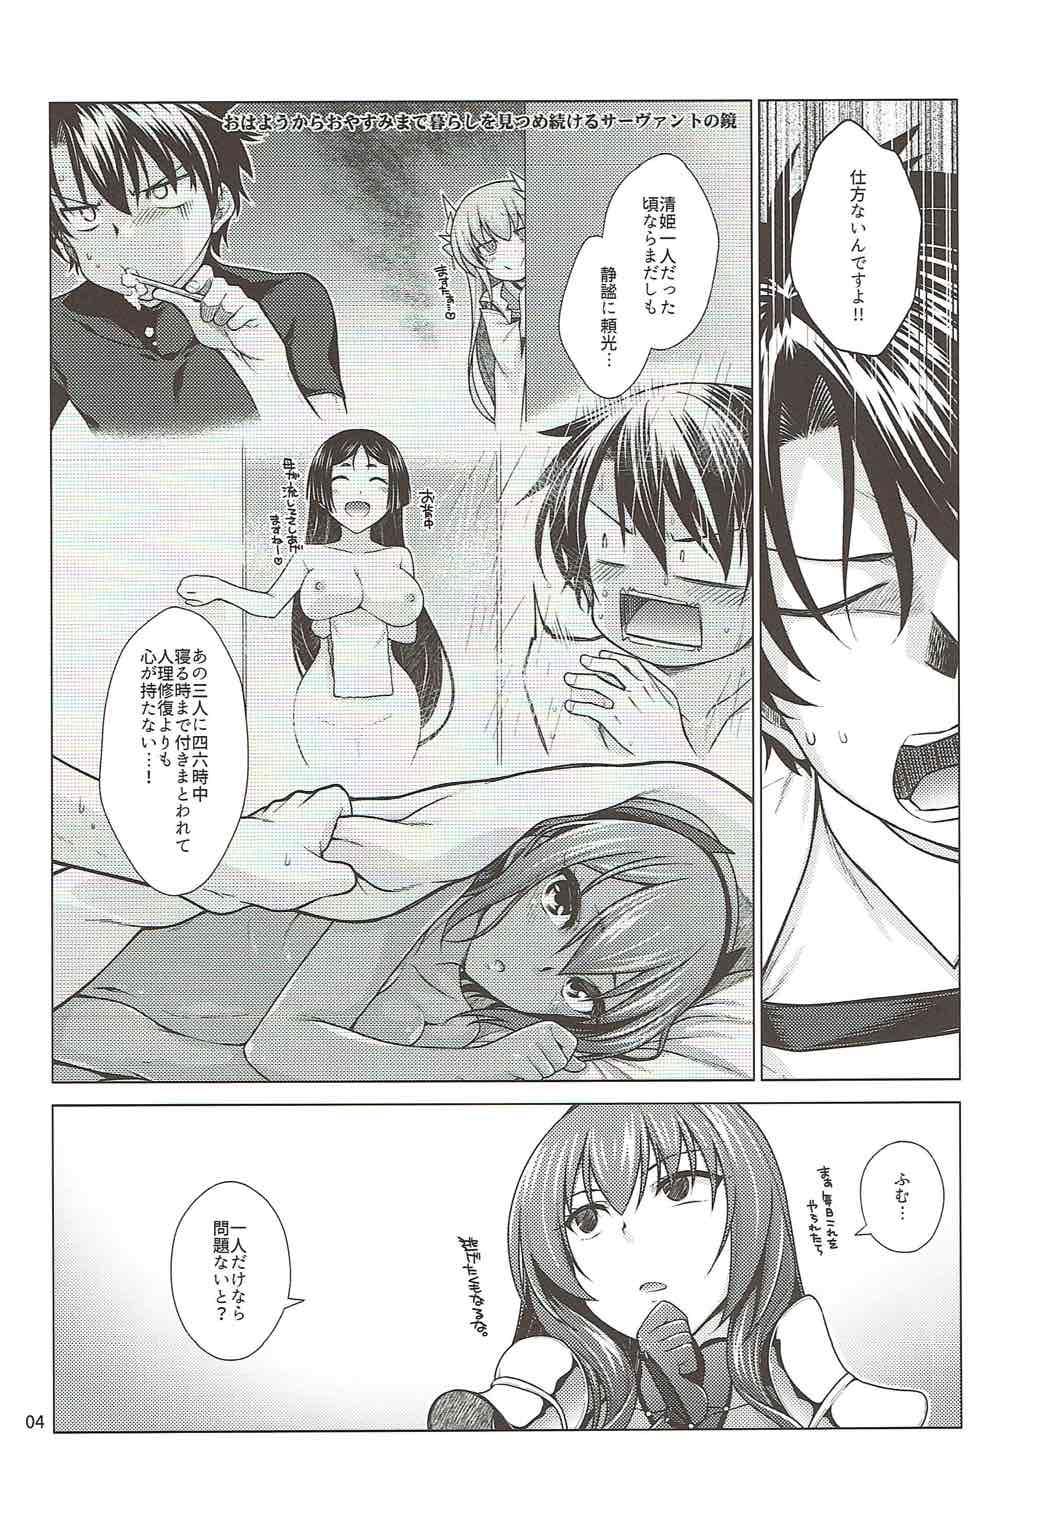 Monstercock Scathach Shishou to Celt Shiki Gachihamex! - Fate grand order Hotwife - Page 3